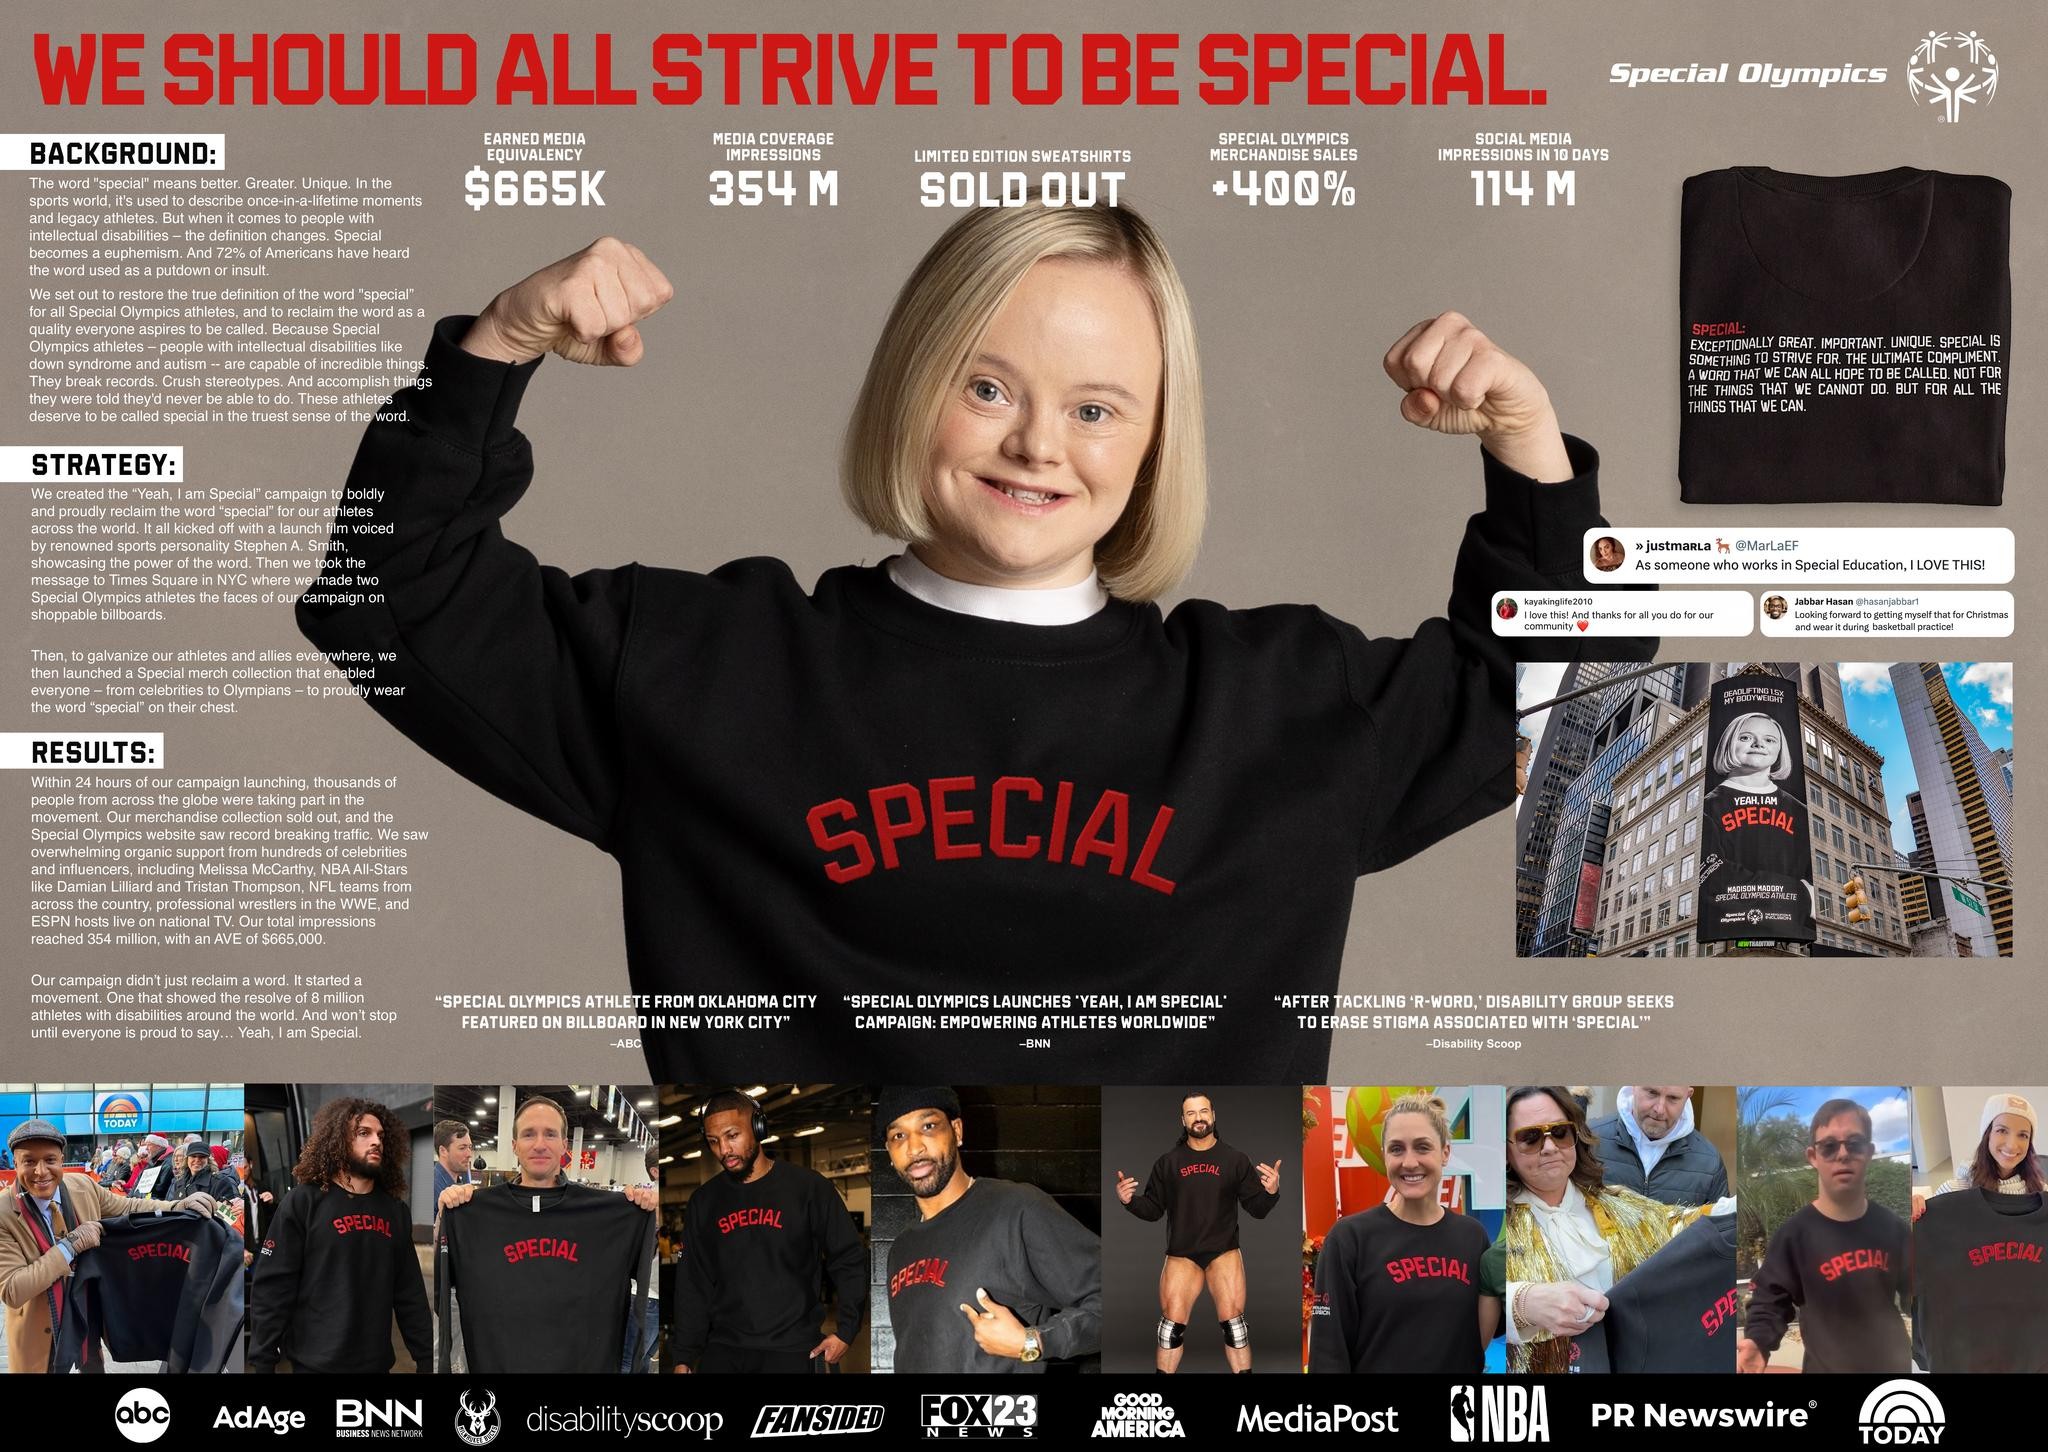 SPECIAL OLYMPICS FIGHTS STIGMA AROUND THE WORD 'SPECIAL'